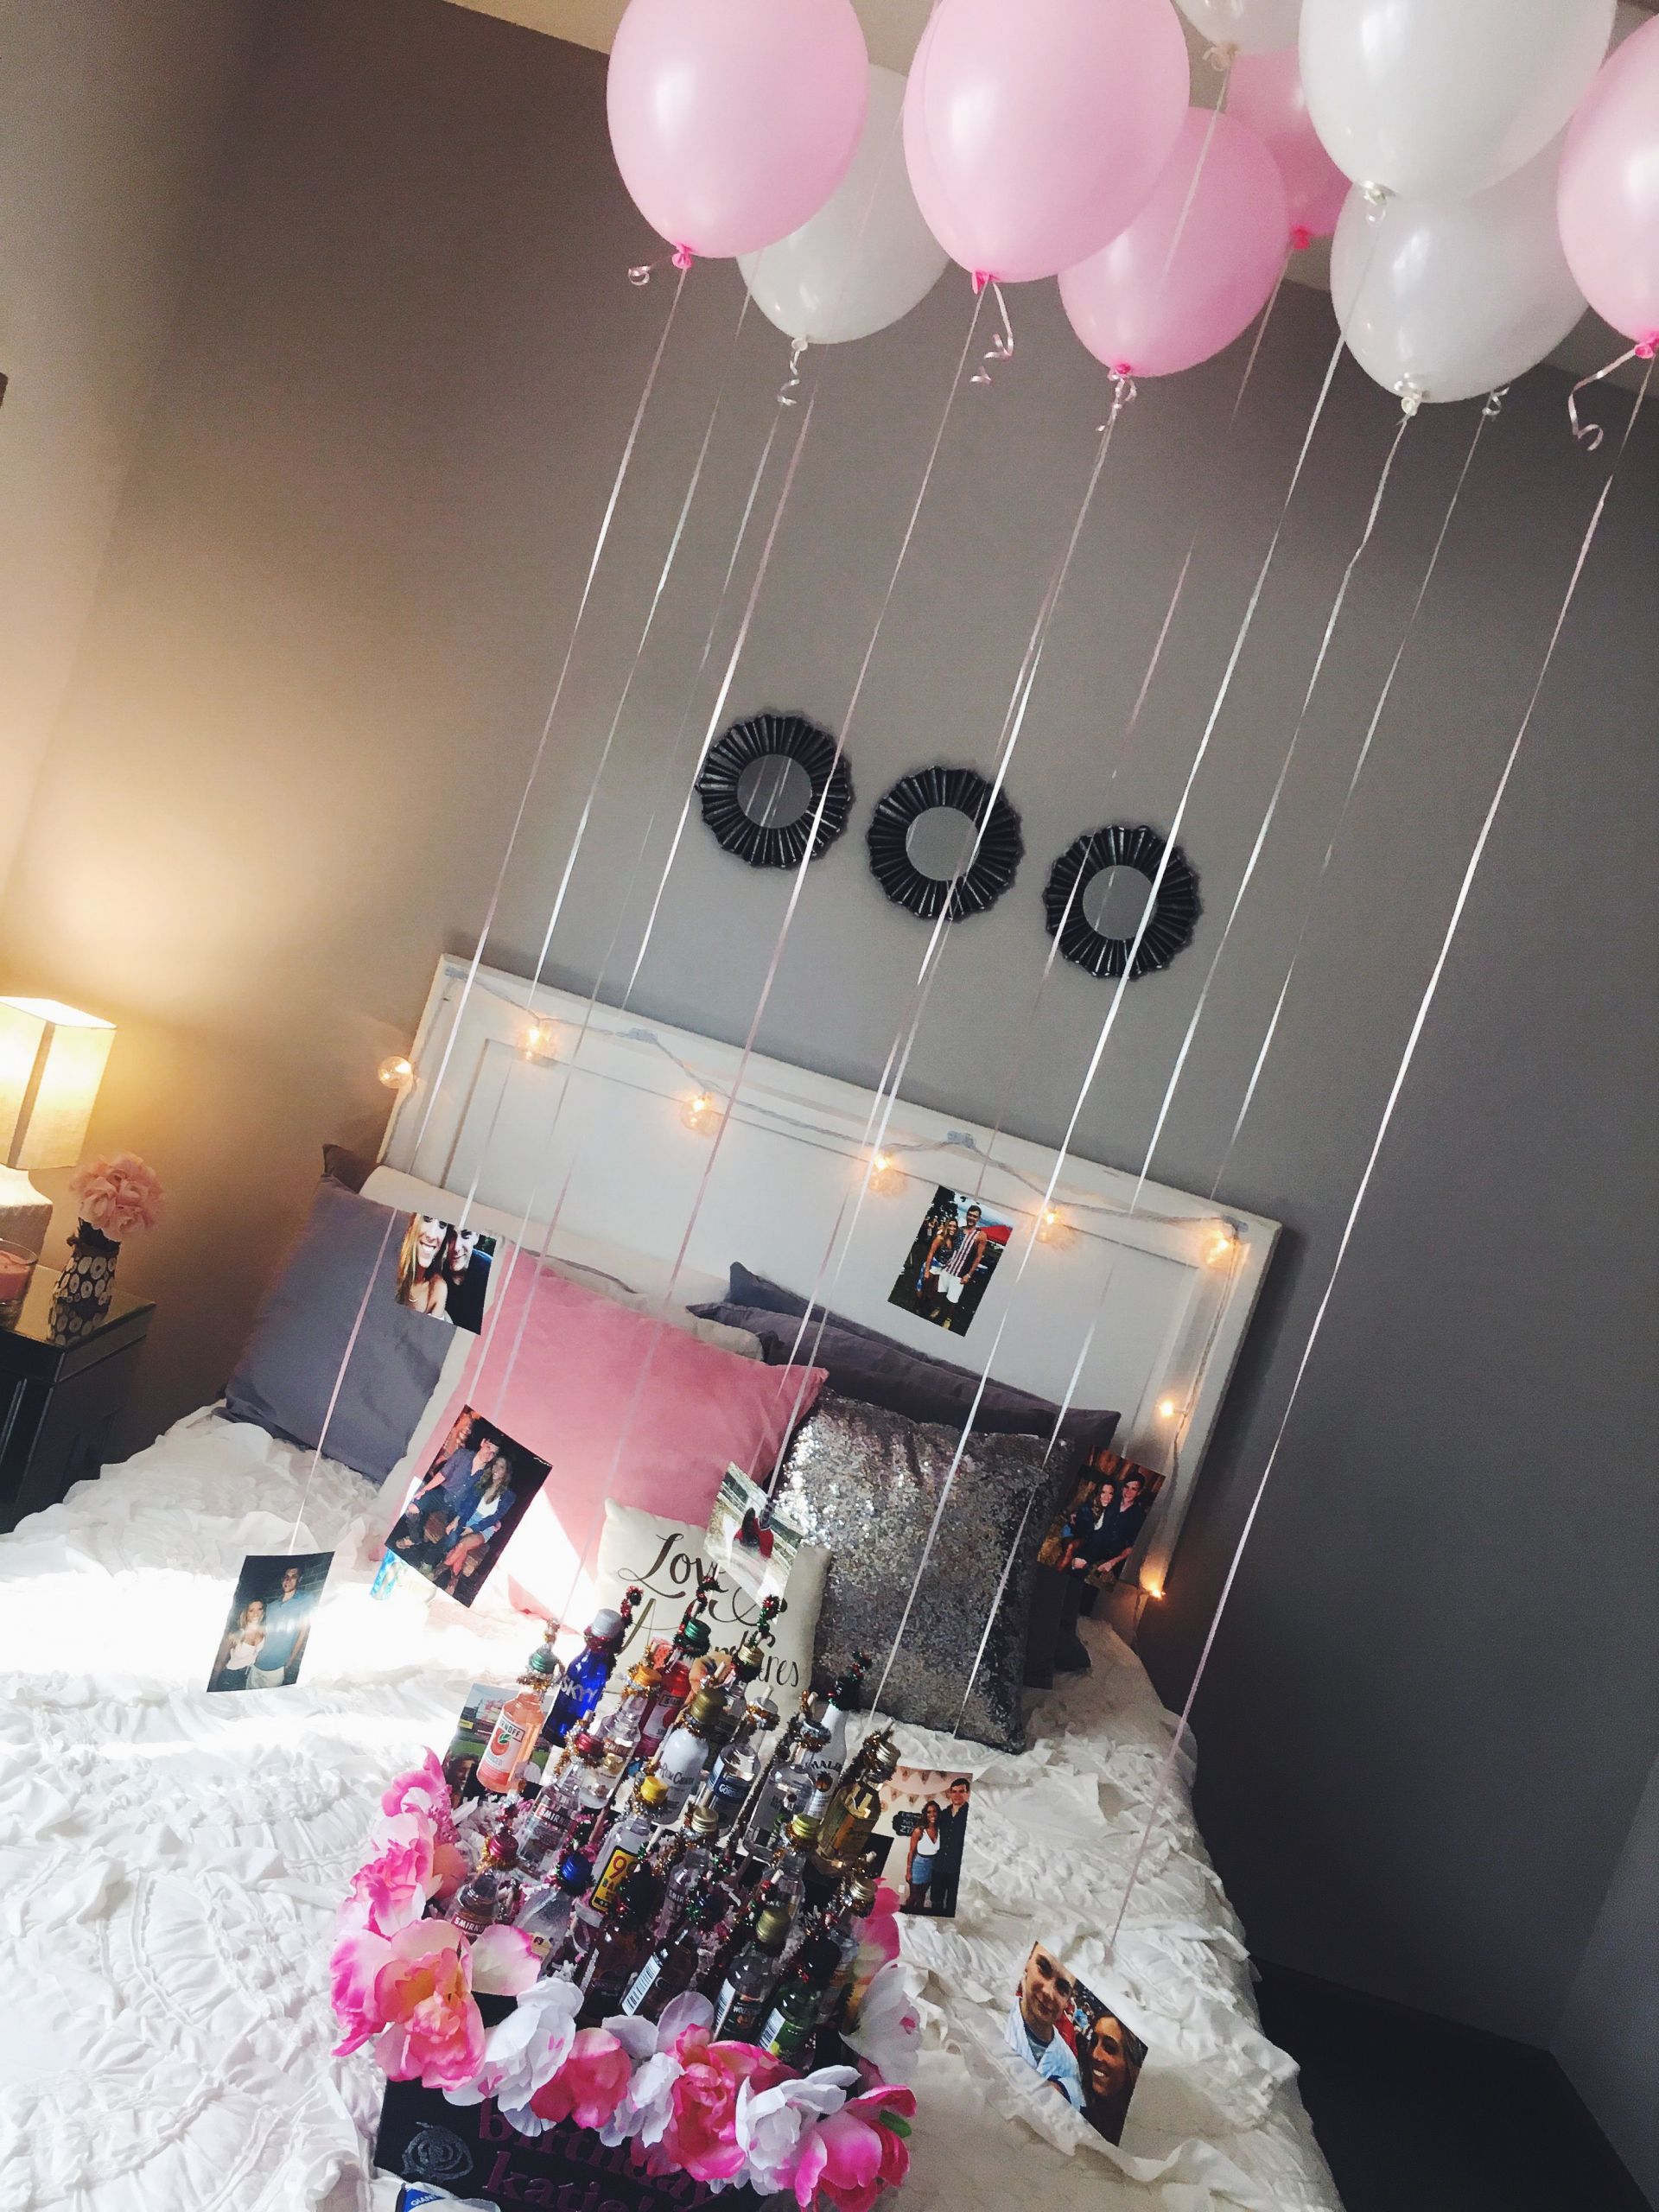 Birthday Gift Ideas For My Girlfriend
 easy and cute decorations for a friend or girlfriends 21st